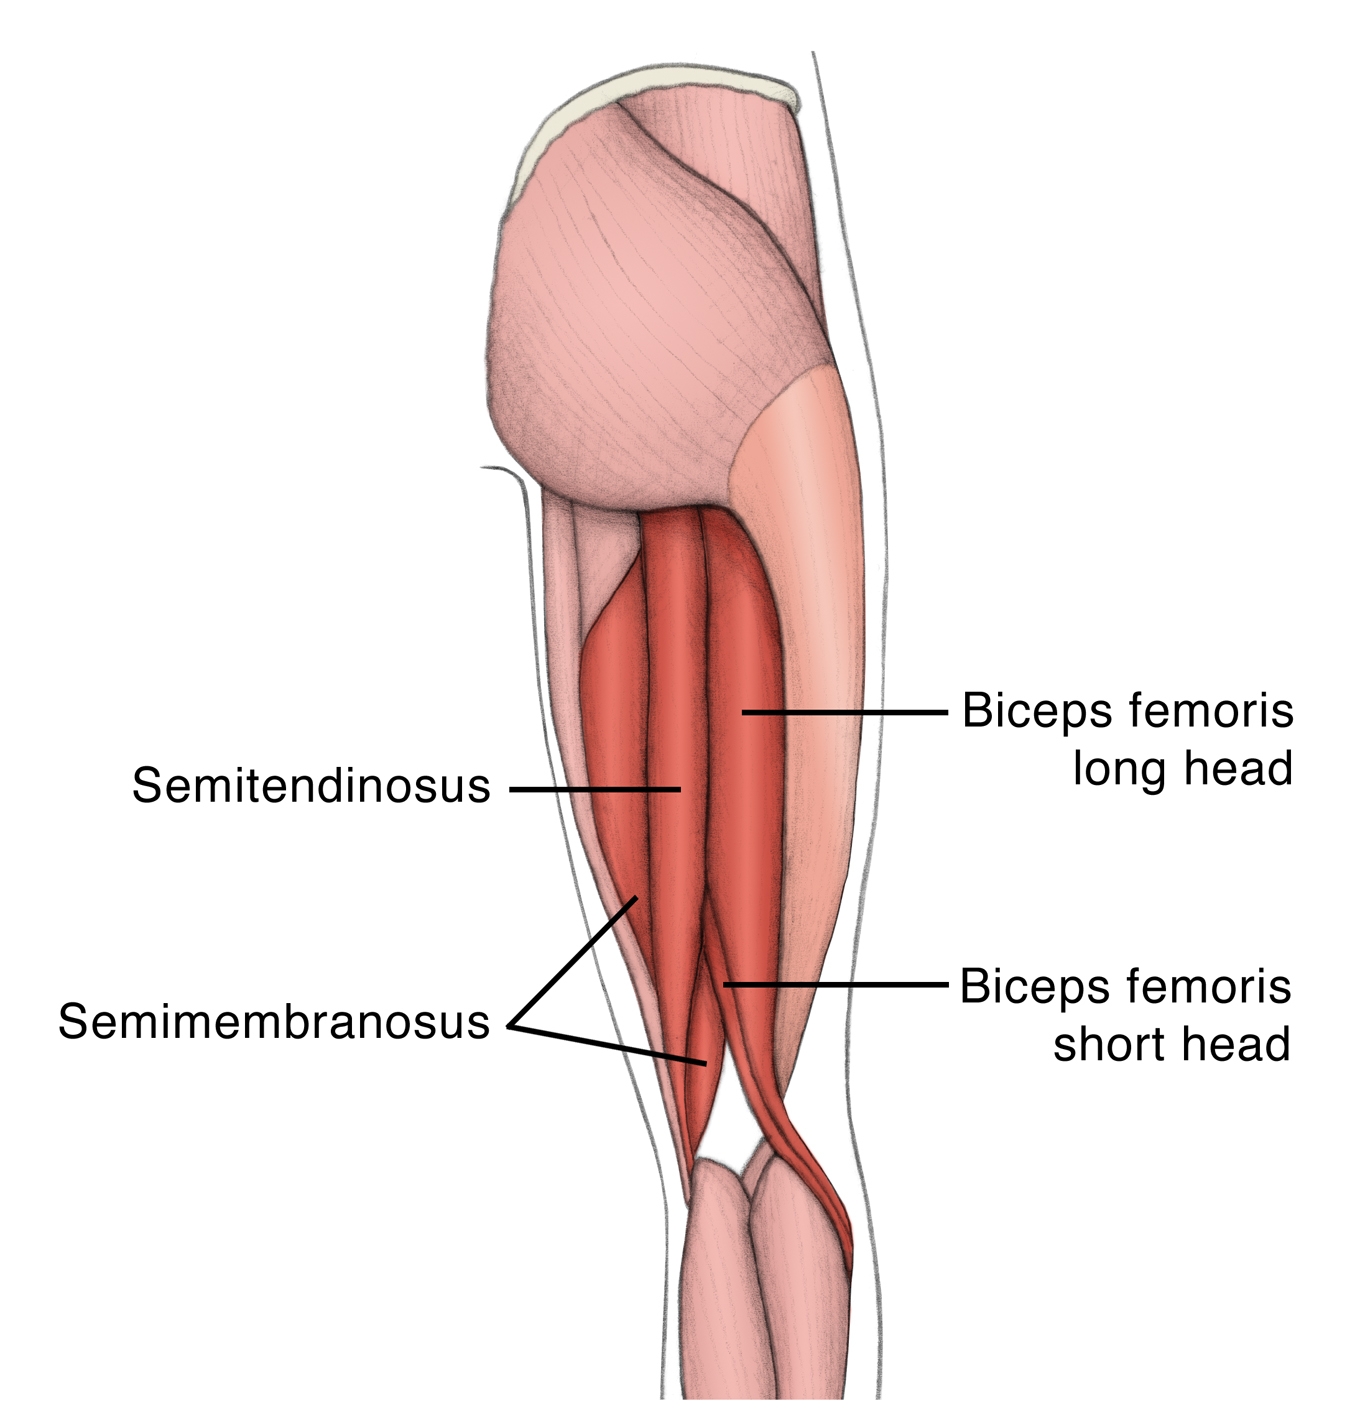 Box 1: The hamstring muscles with the arrow indicating the primary location for pain in HHT